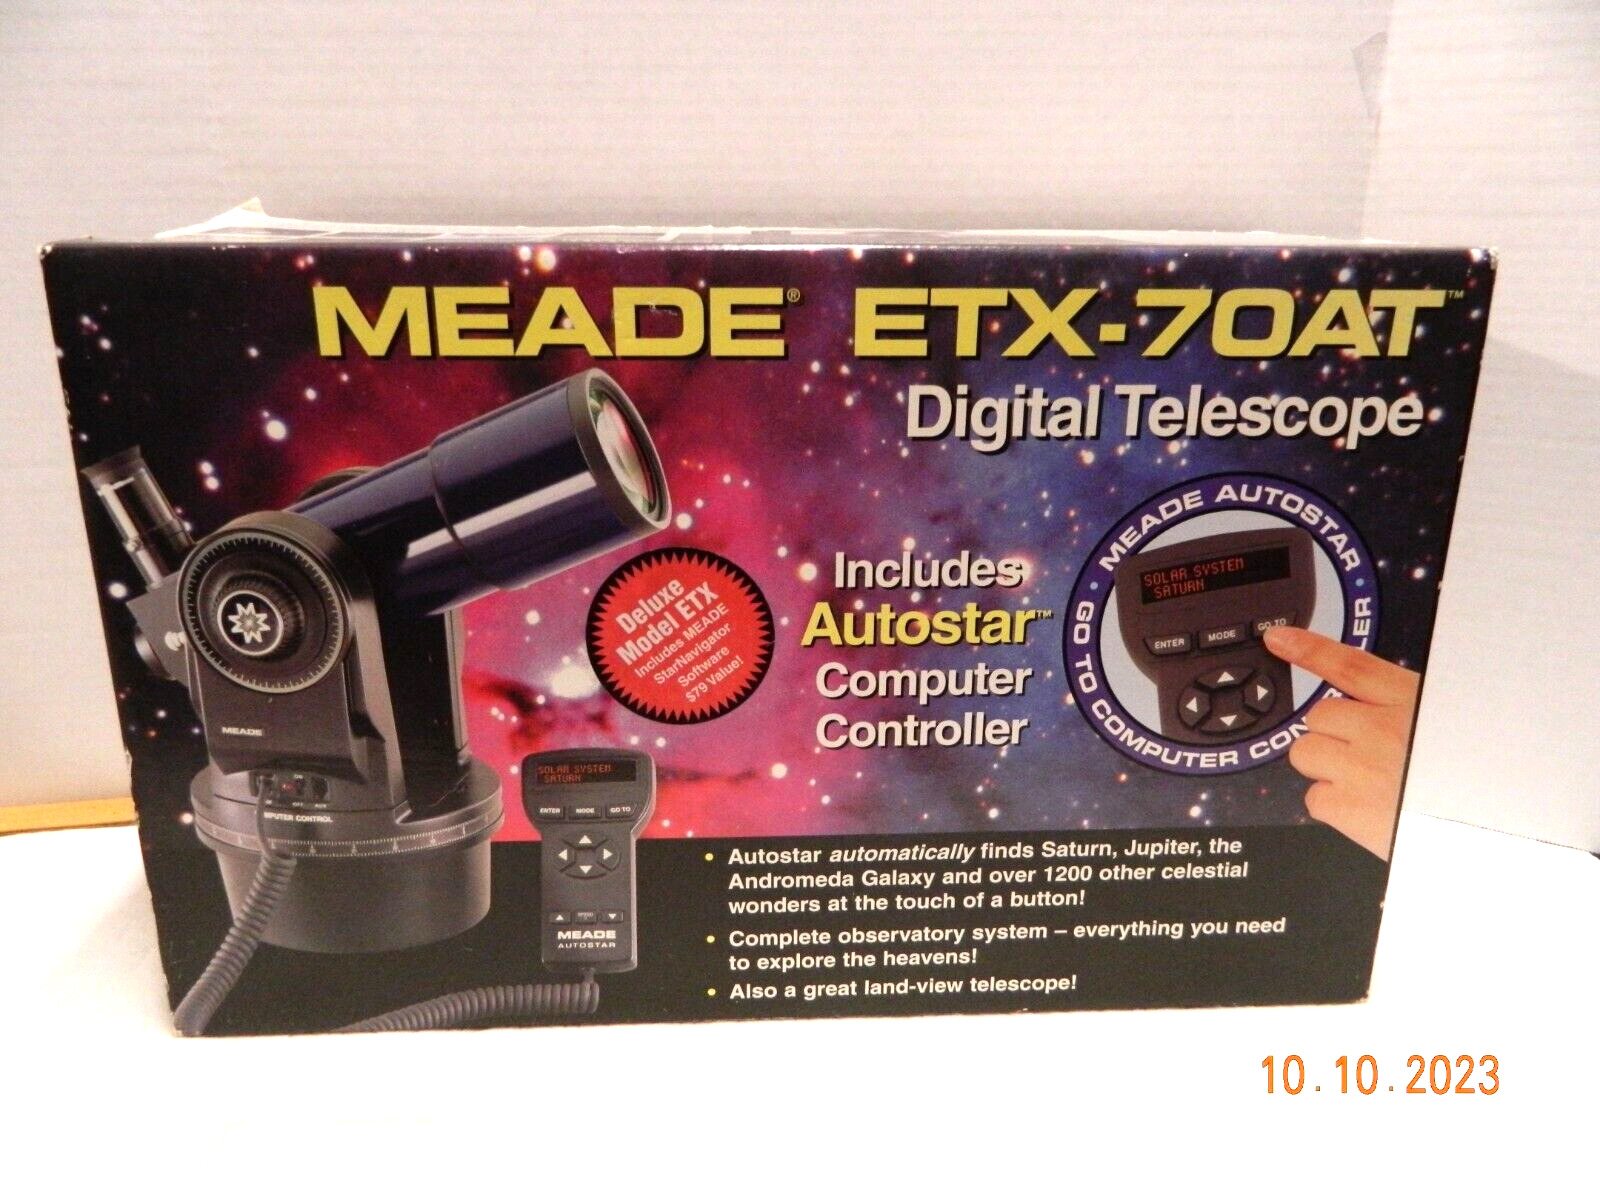 MEADE ETX-70AT TELESCOPE WITH AUTOSTAR COMPUTER CONTROLLER IN BOX